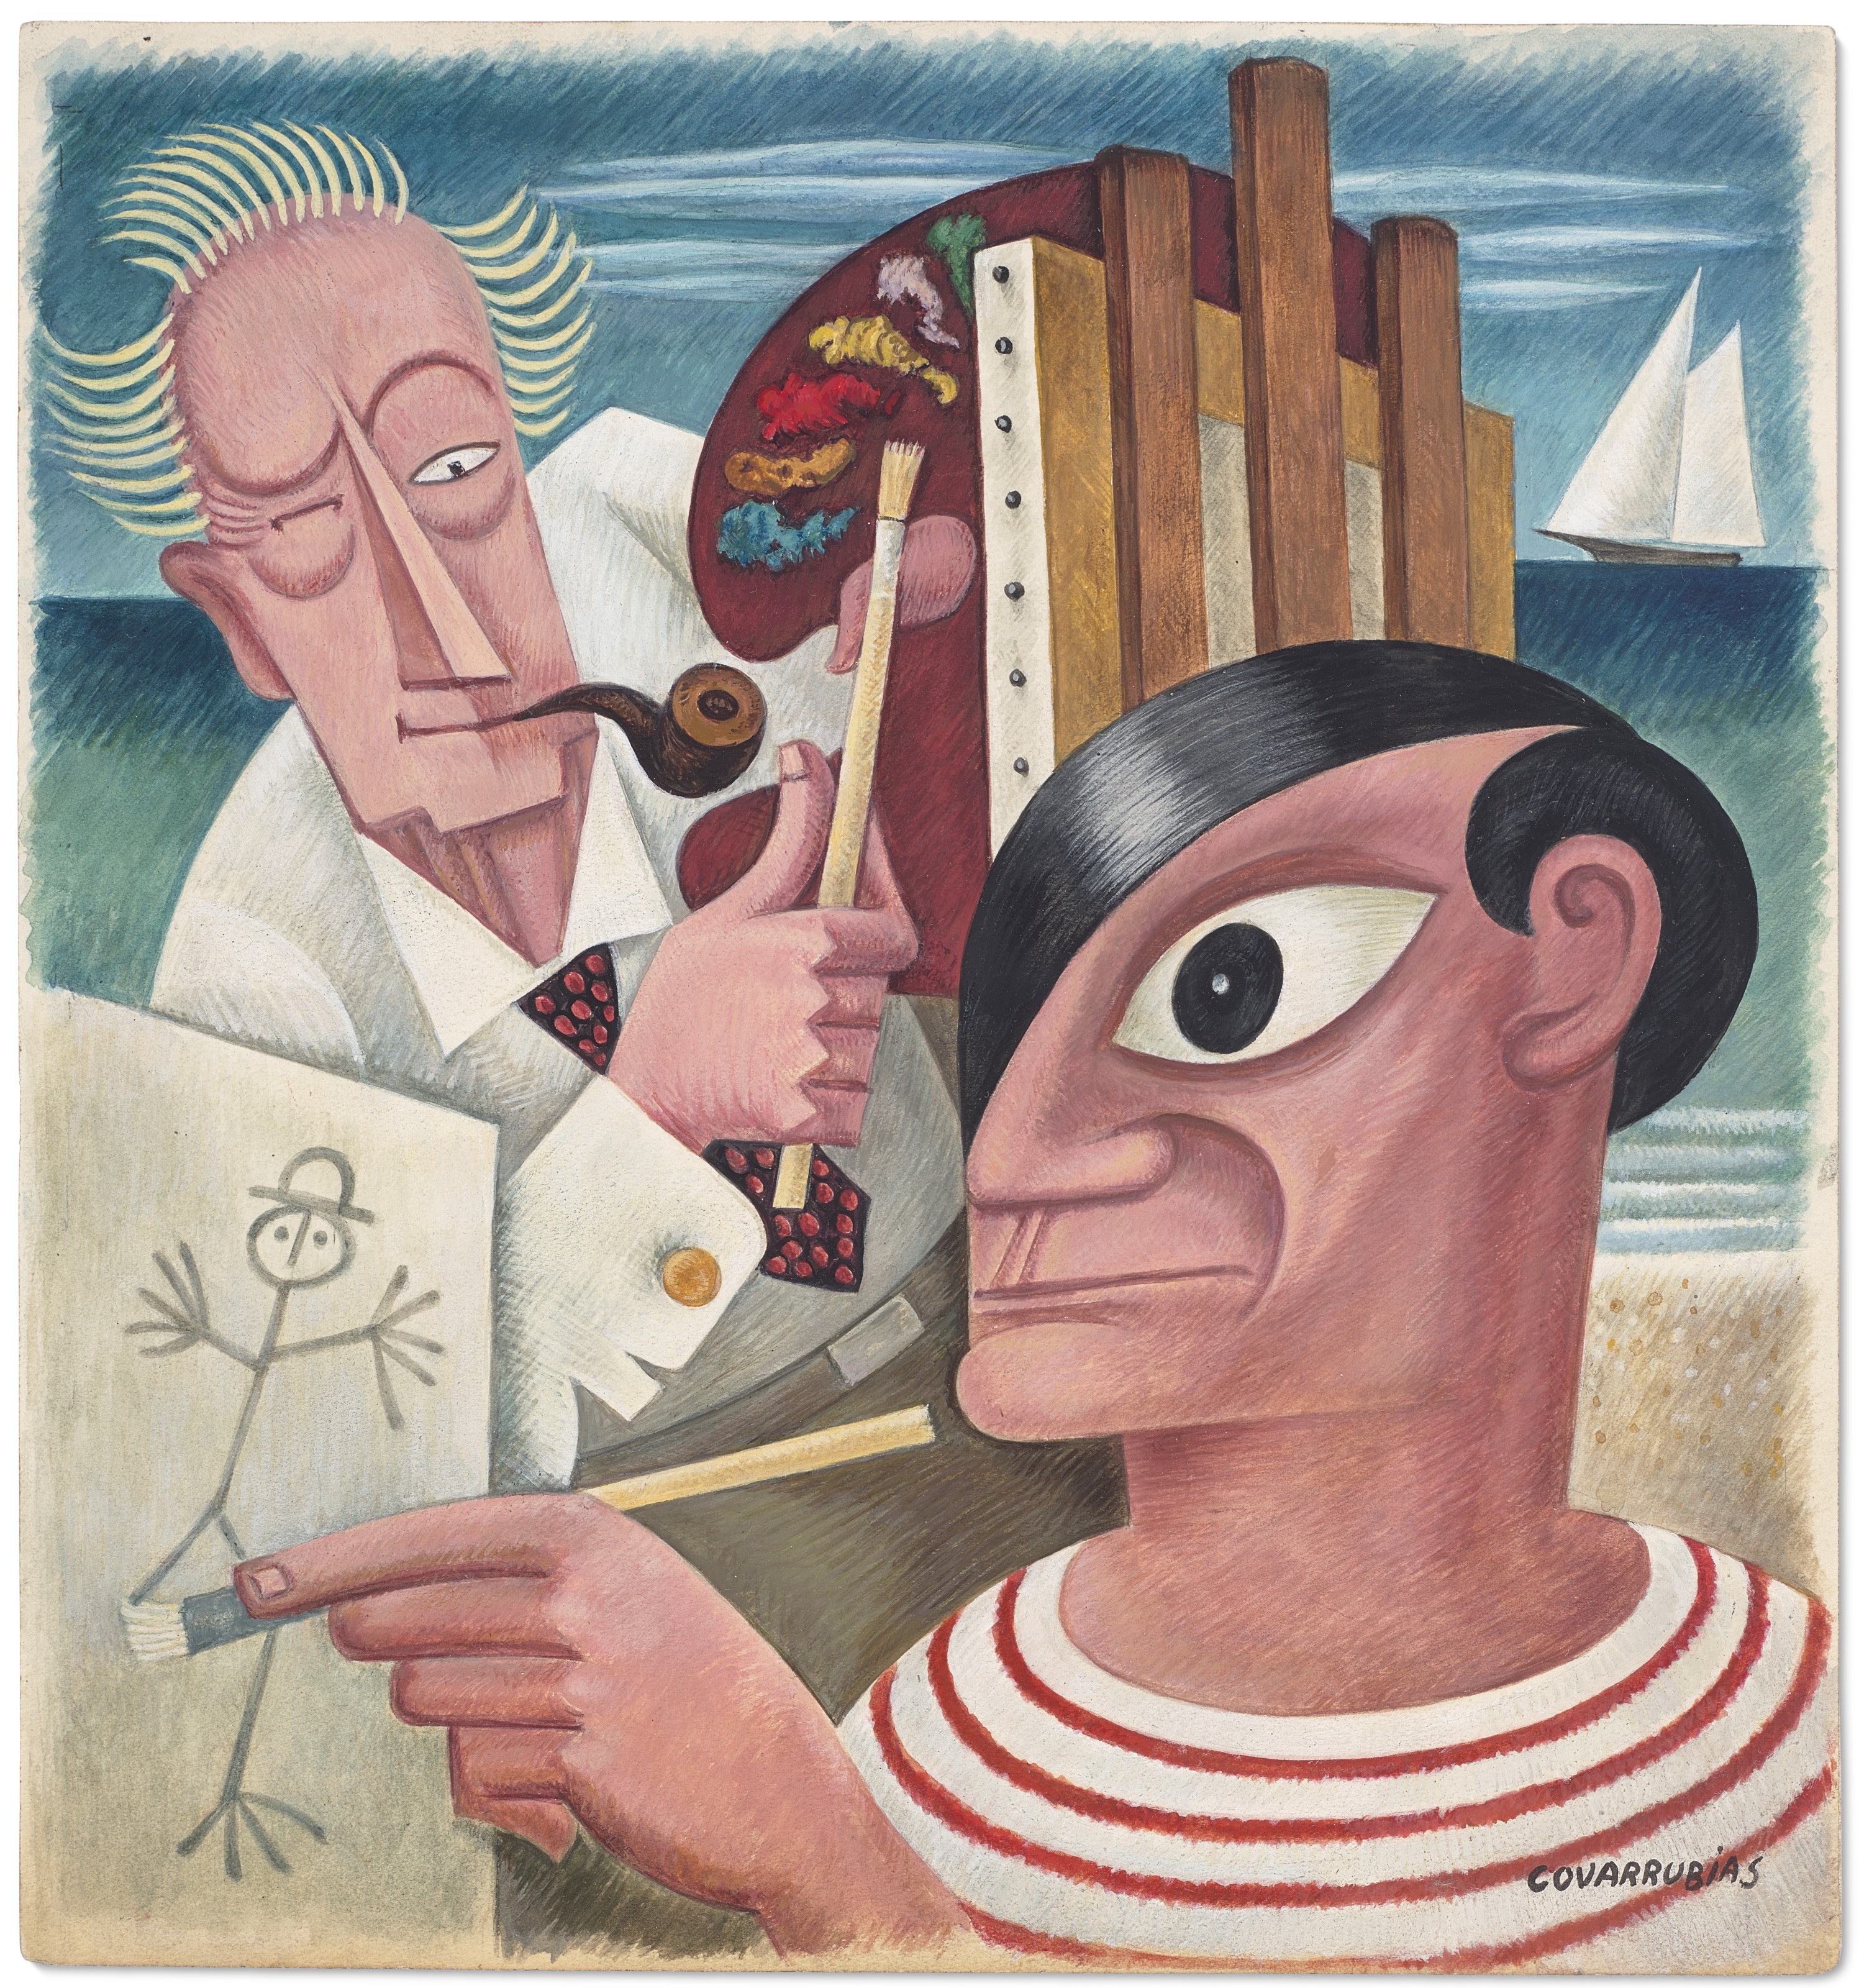 Chandler Christy vs. Pablo Picasso from the Vanity Fair Series Impossible Conversations by Miguel Covarrubias, Executed circa 1930